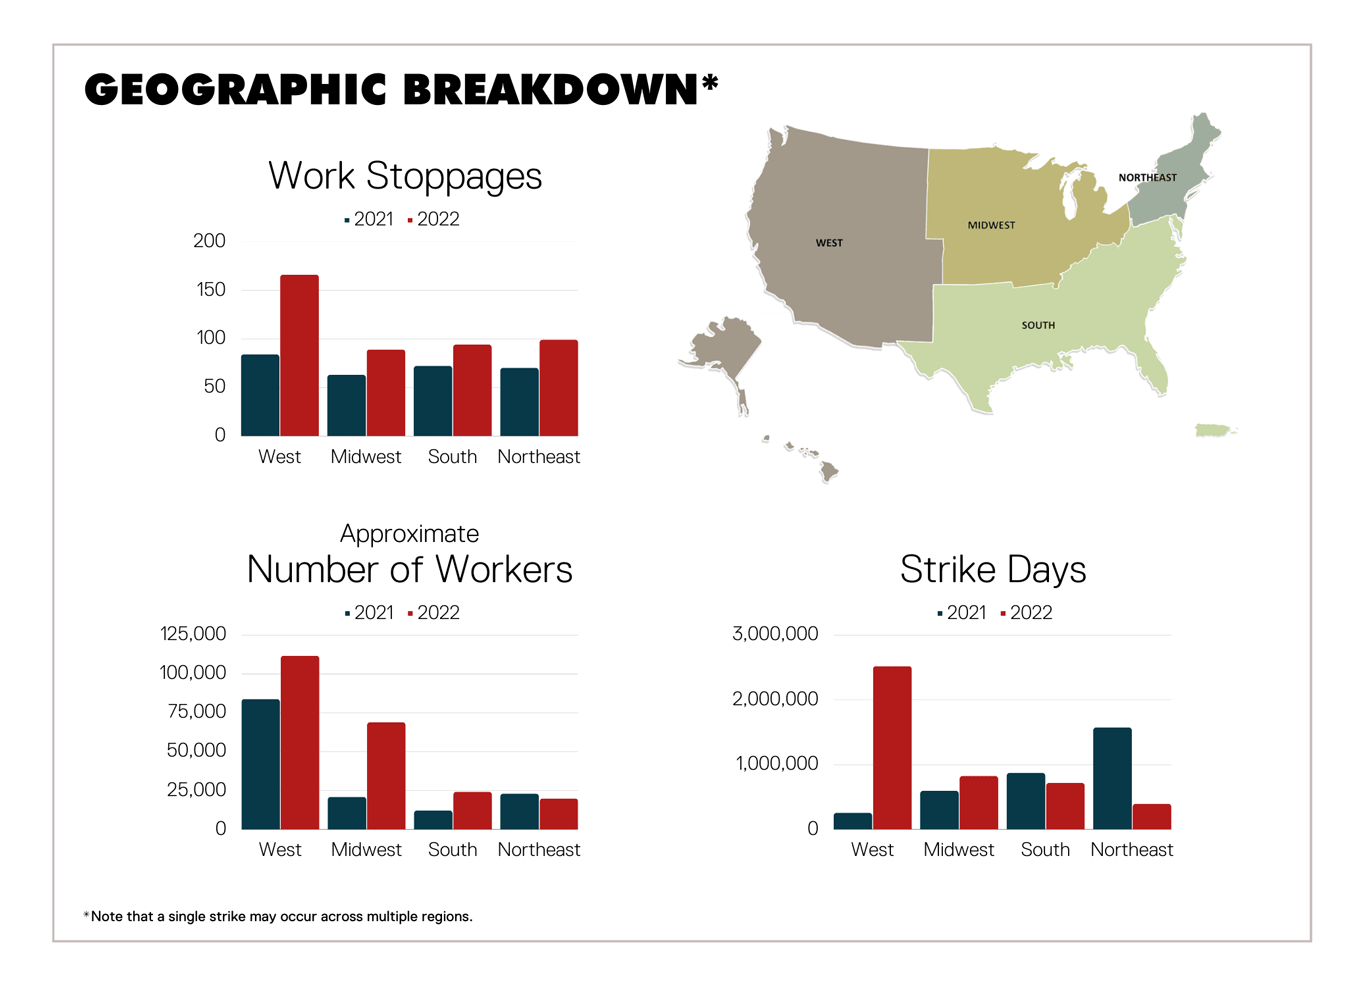 Graphs showing the geographical breakdown of strikes and works stoppages across the U.S. in 2022.